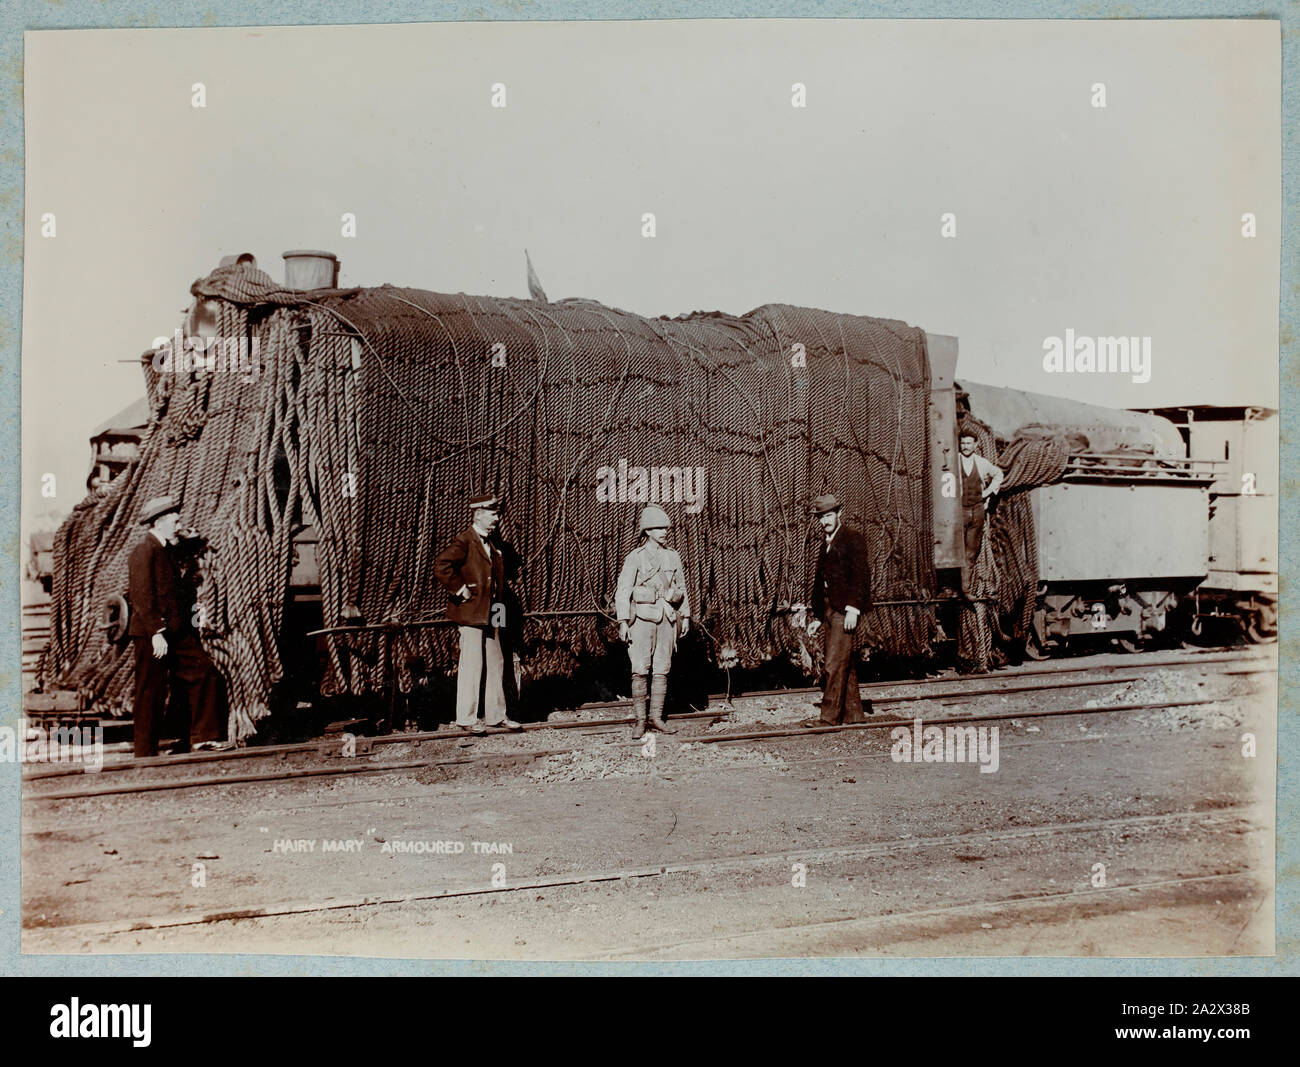 Photograph - 'Hairy Mary Armoured Train', South Africa, circa 1902, One of 74 black and white photographs contained within a hard-covered photograph album. Inscribed on front page of the album 'M.G.A. Warner'. Belonged to Sister Mabel Ashton Warner, who served in Queen Alexandra's Royal Nursing Service. Photographs are glued into album, and are generally very faded. Some appear commercially-produced; others are rough and amateurish Stock Photo